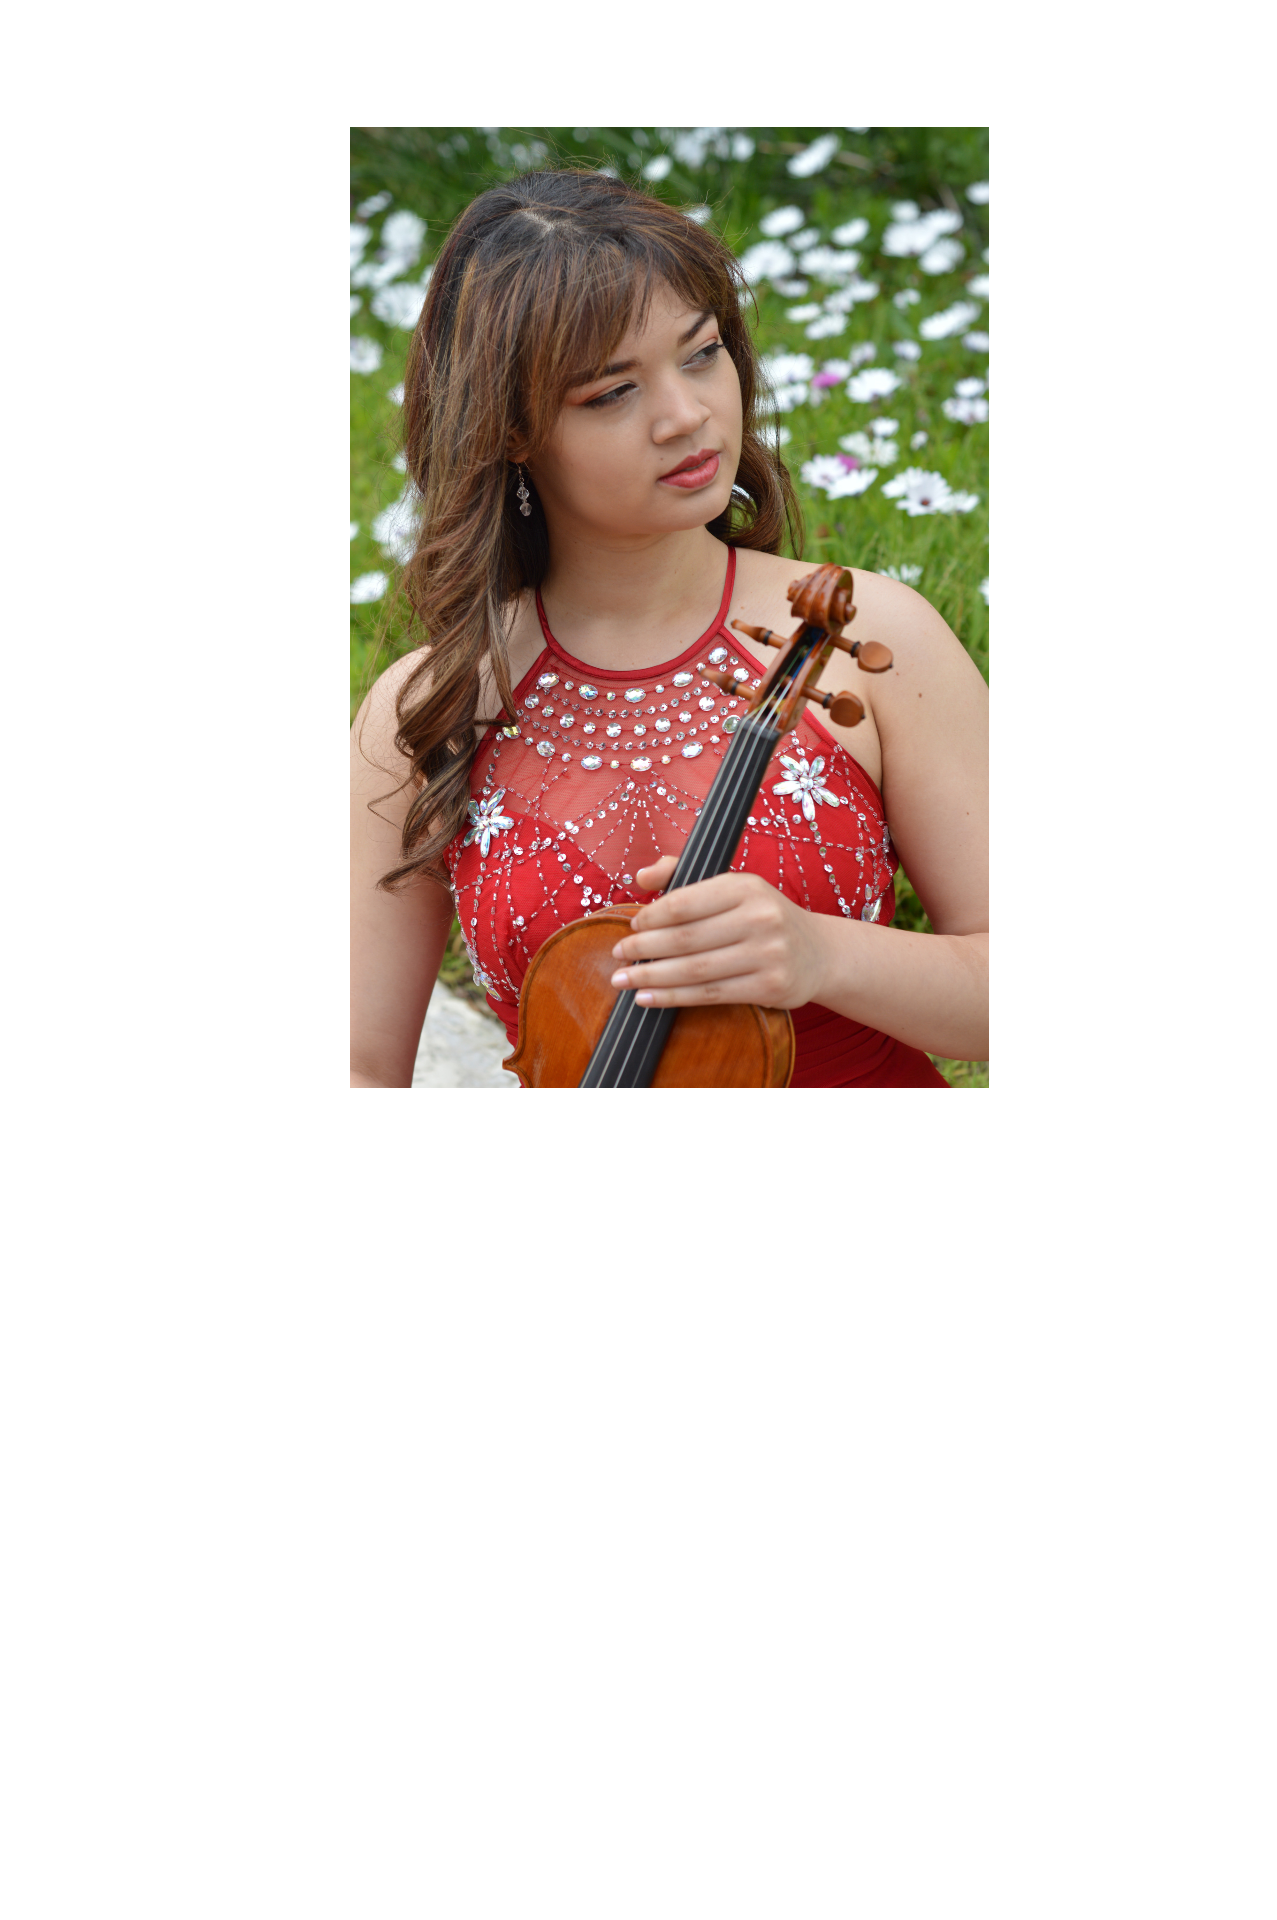 Annelie Gregory with violin